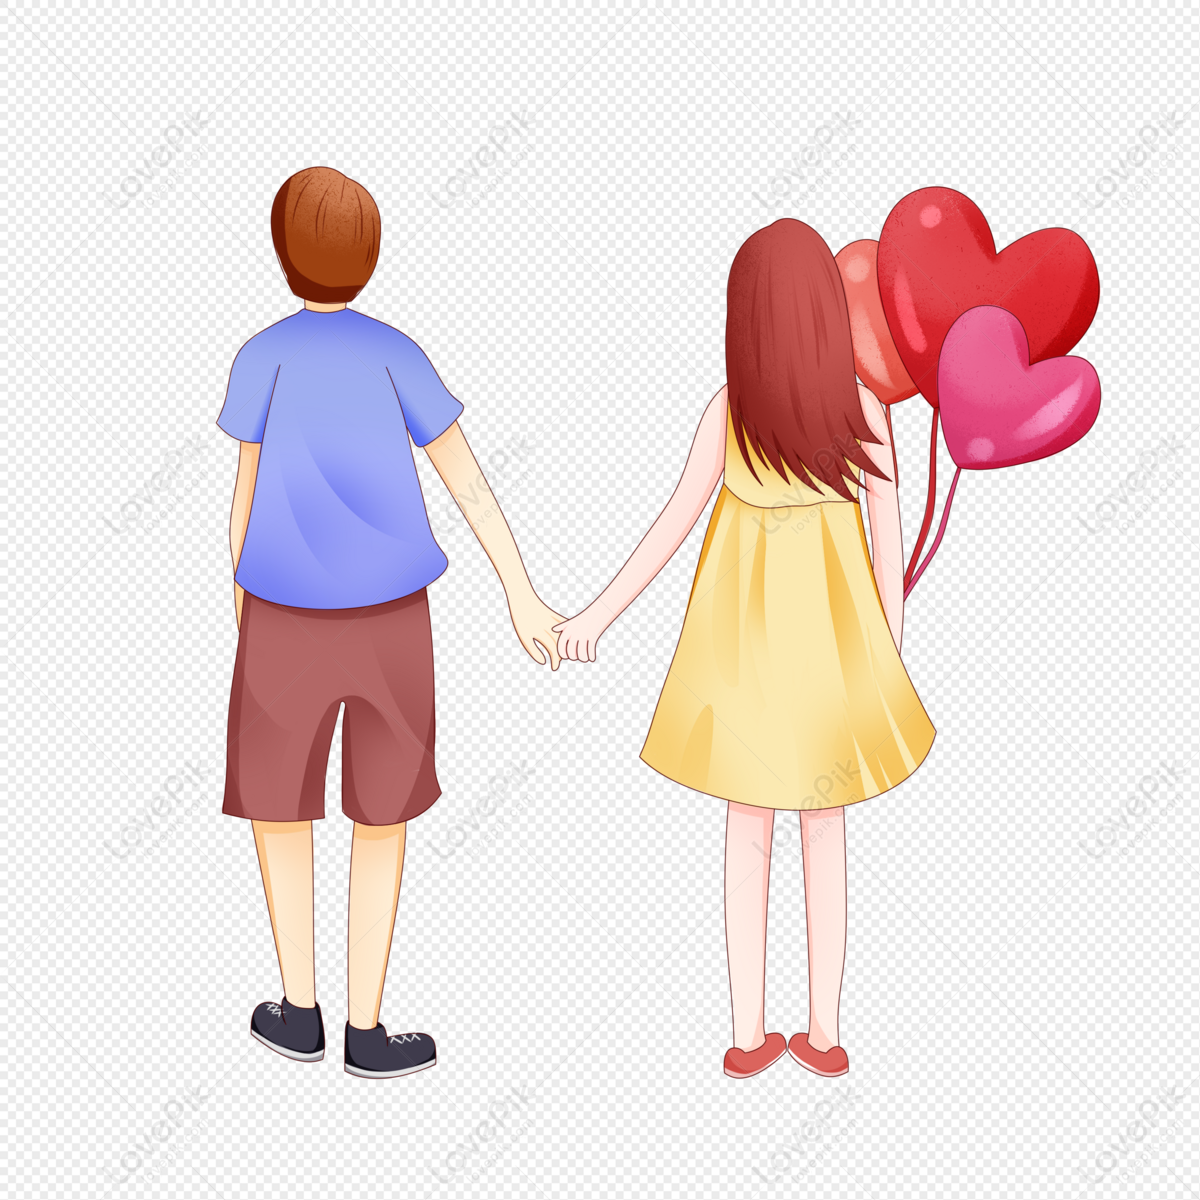 drawing of couple holding hands walking